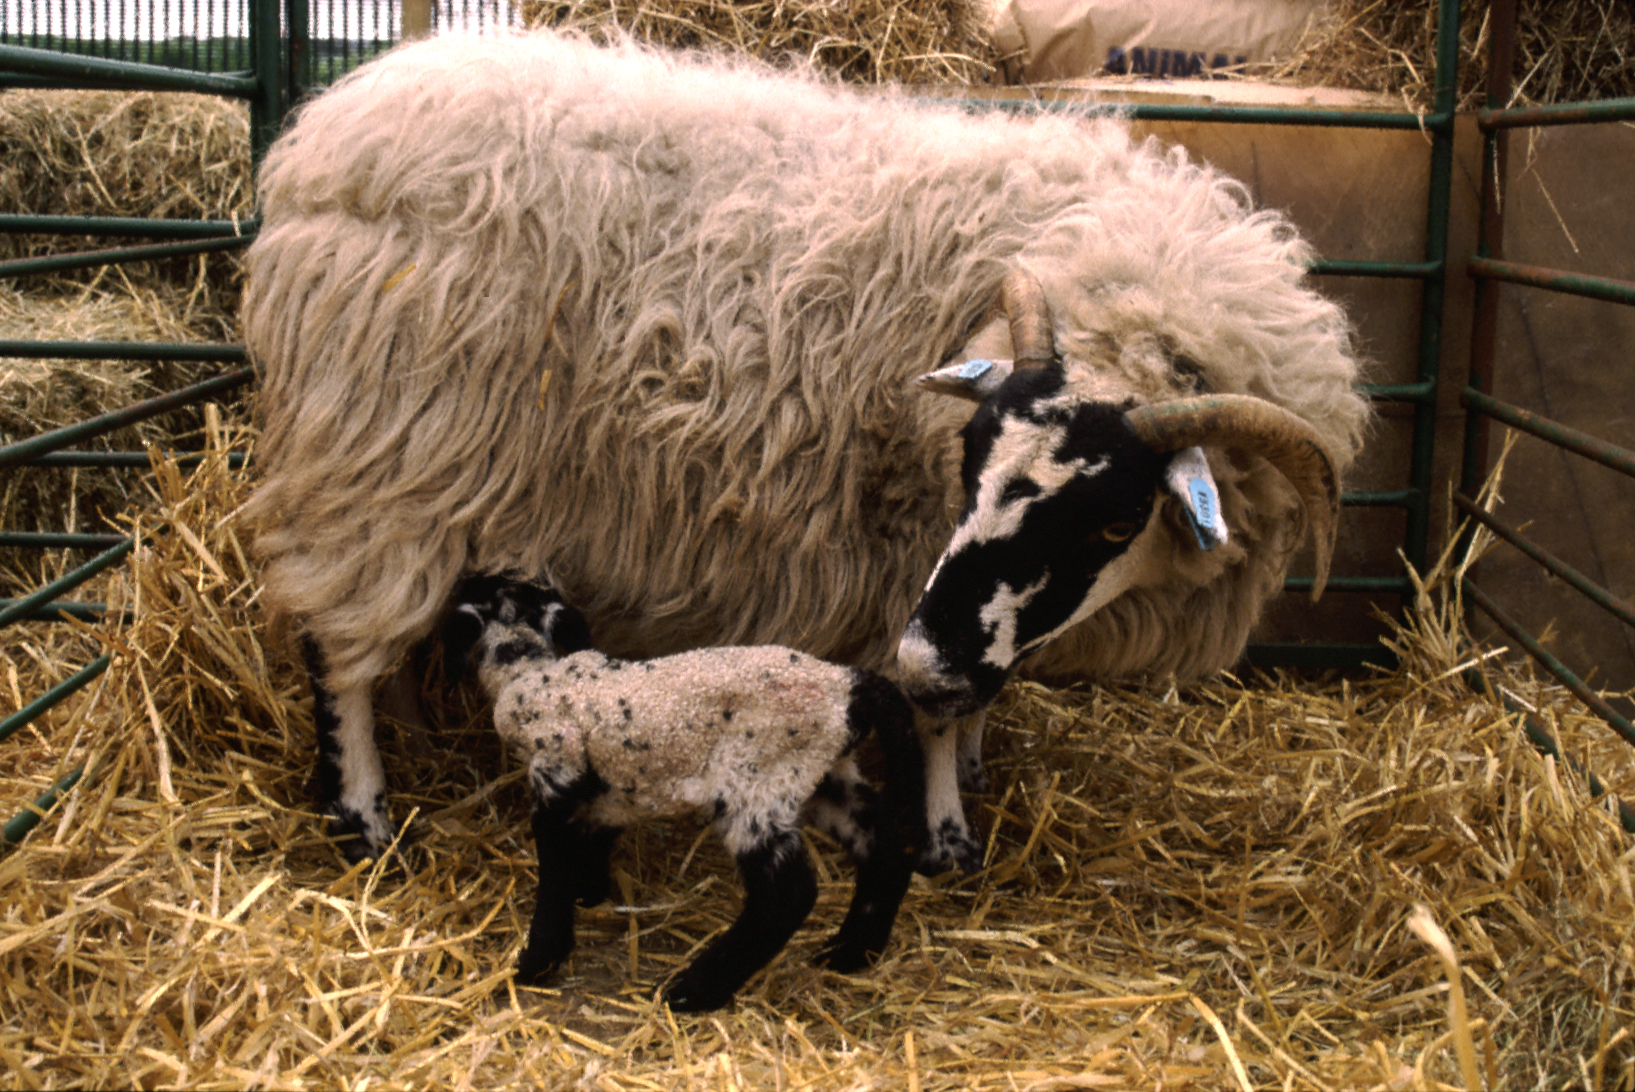 Toxoplasmosis is one of the most commonly diagnosed causes of abortion in sheep